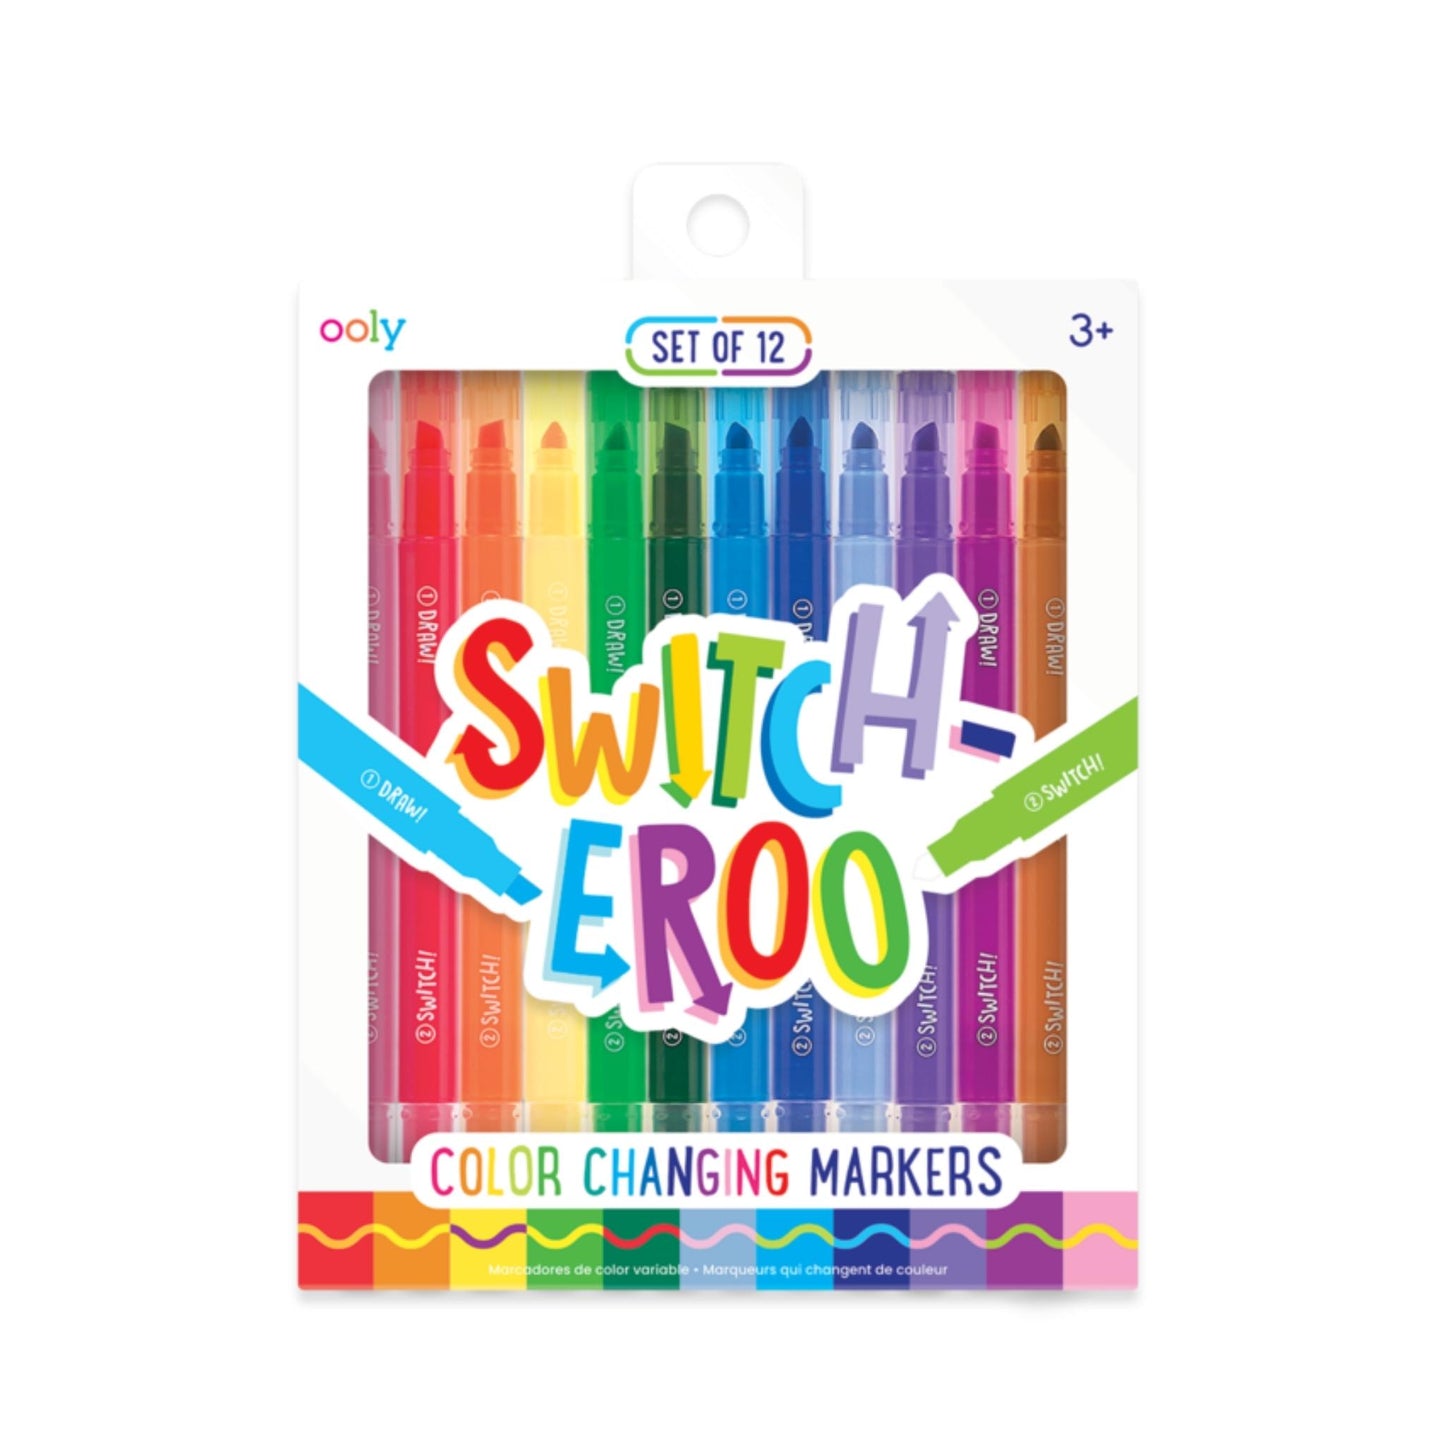 ooly switcheroo markers make art time creative and fun